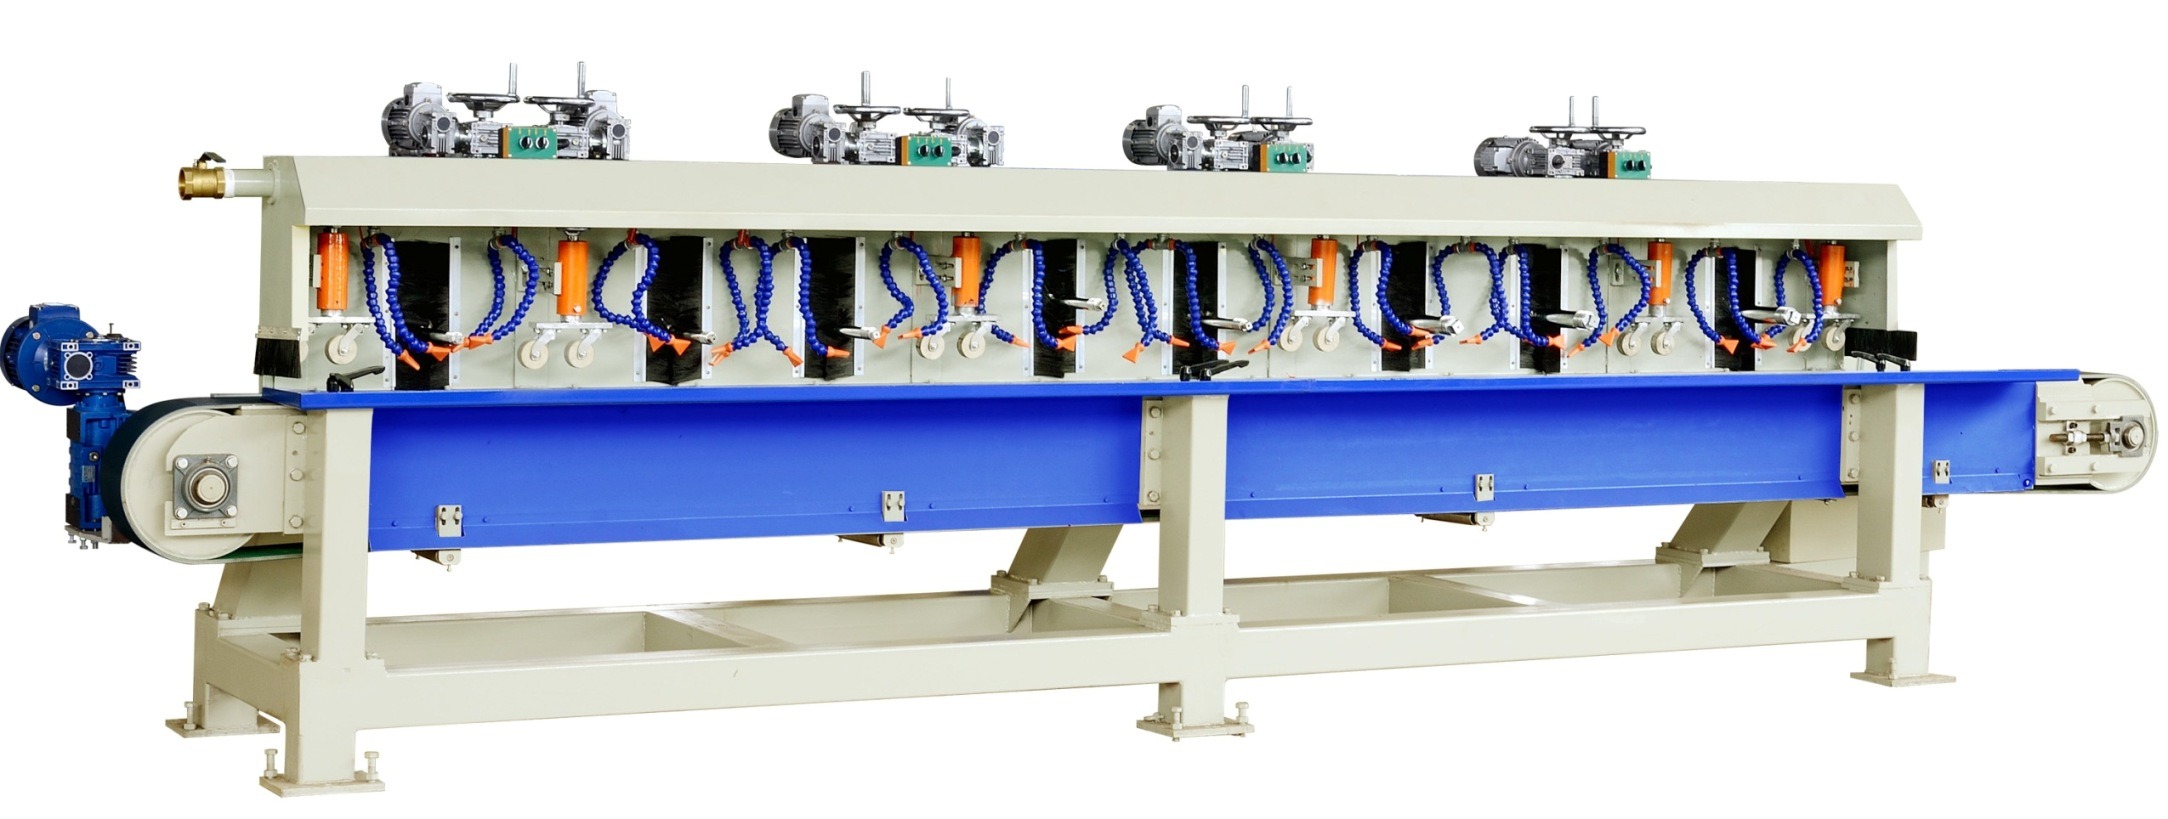 Fully Automatic Stone Line Profiling Machine with 8 Heads (ZDX150-8)